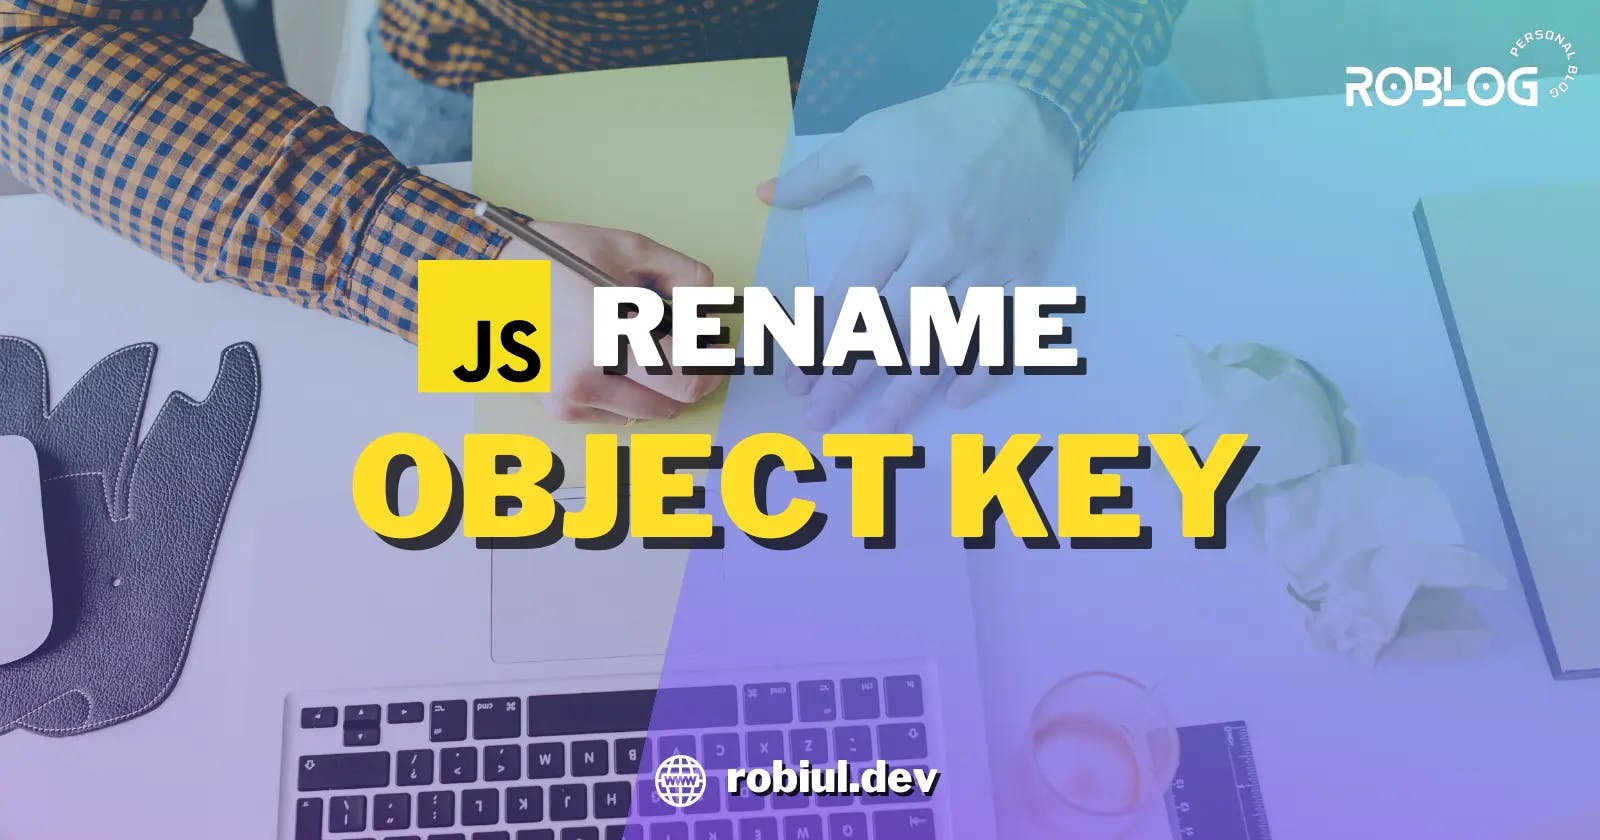 How to Rename an Object Key in JavaScript